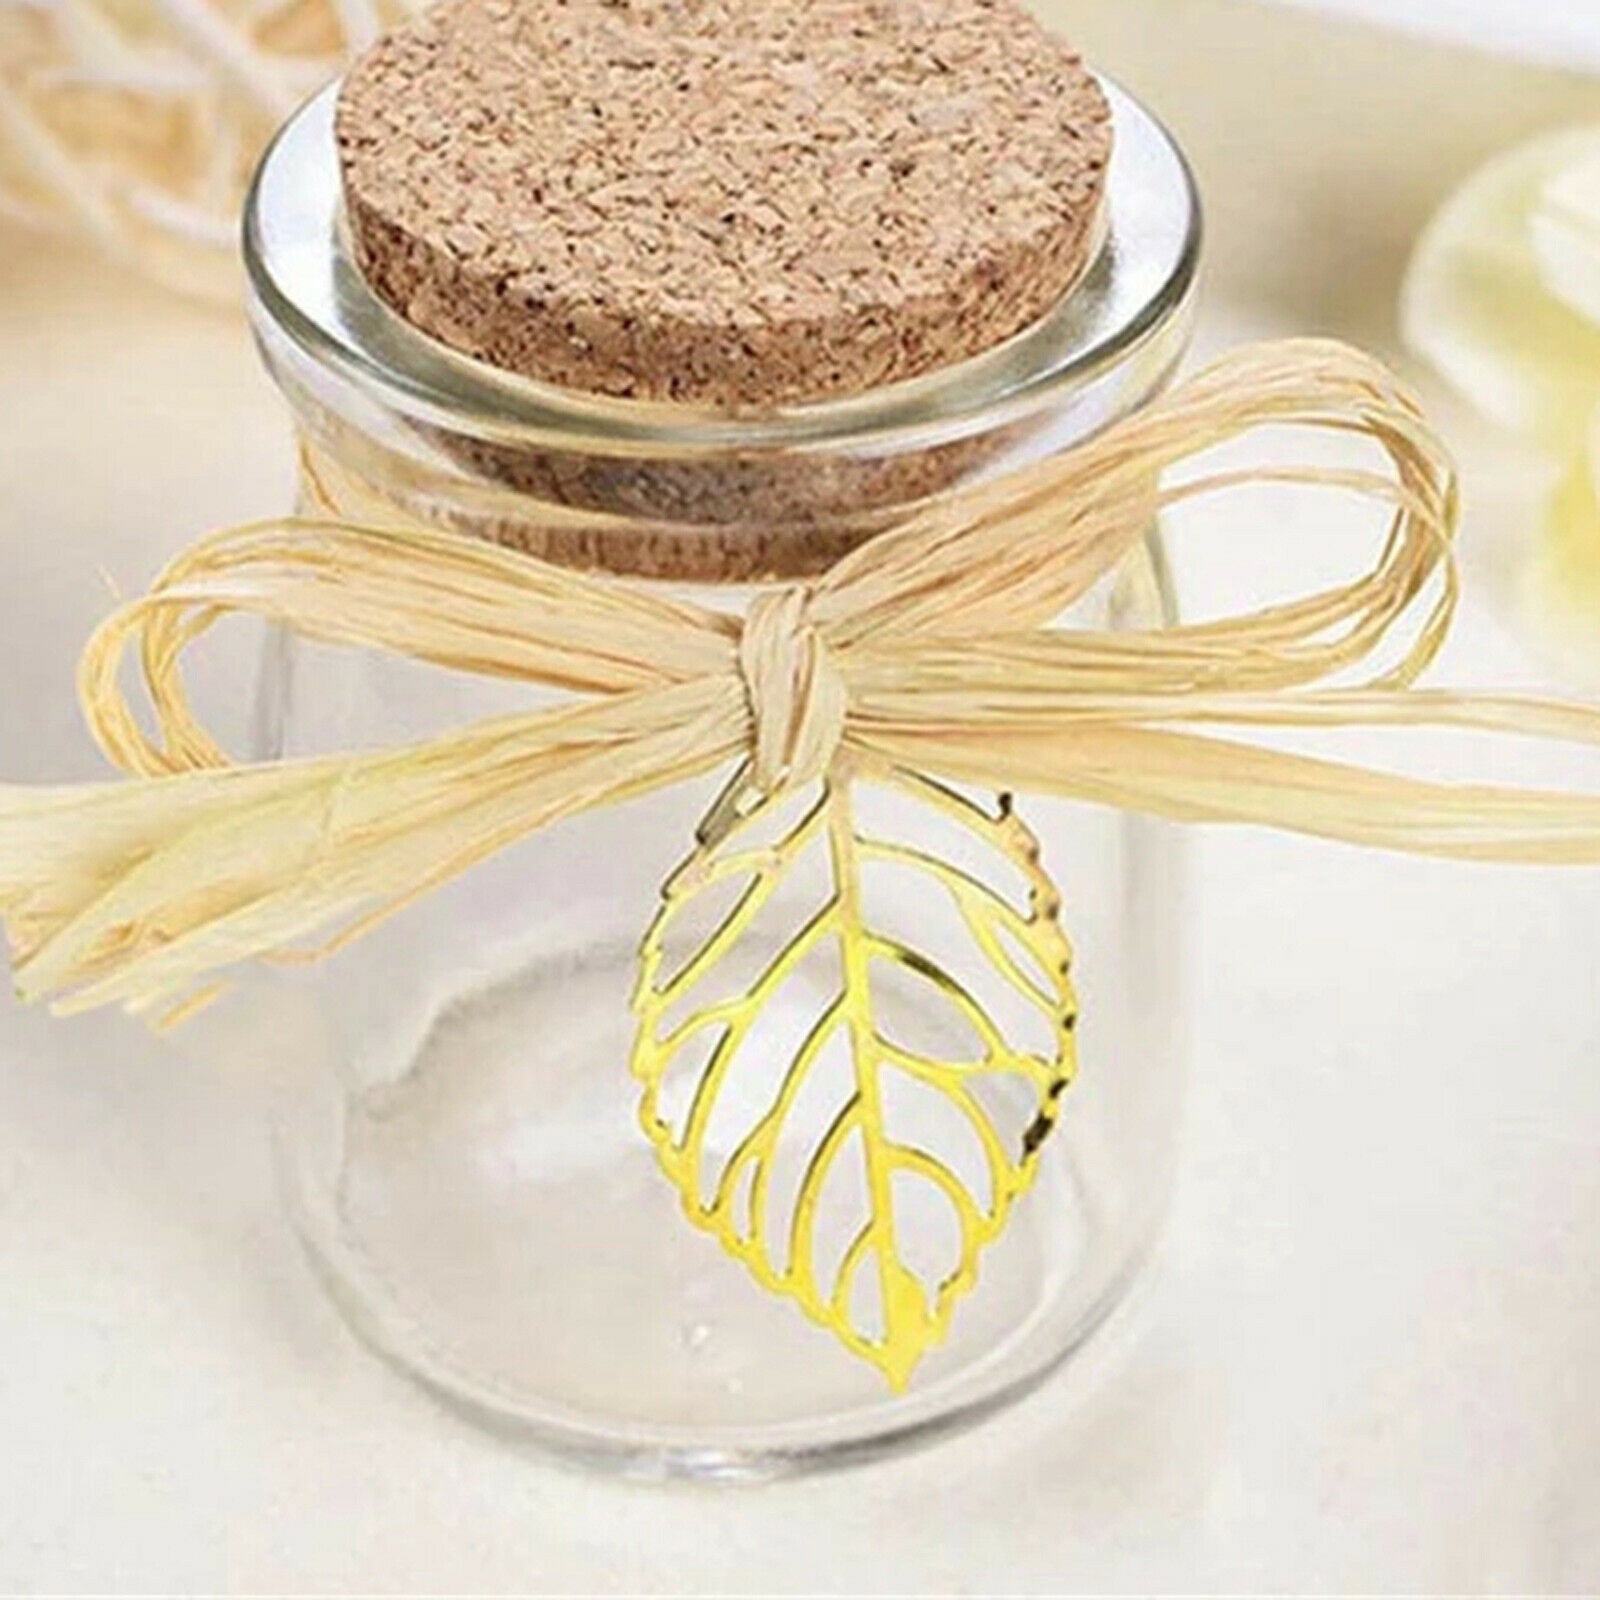 200g Raffia Grass Paper Ribbon for Crafts Gift Packing Flower Wrapping